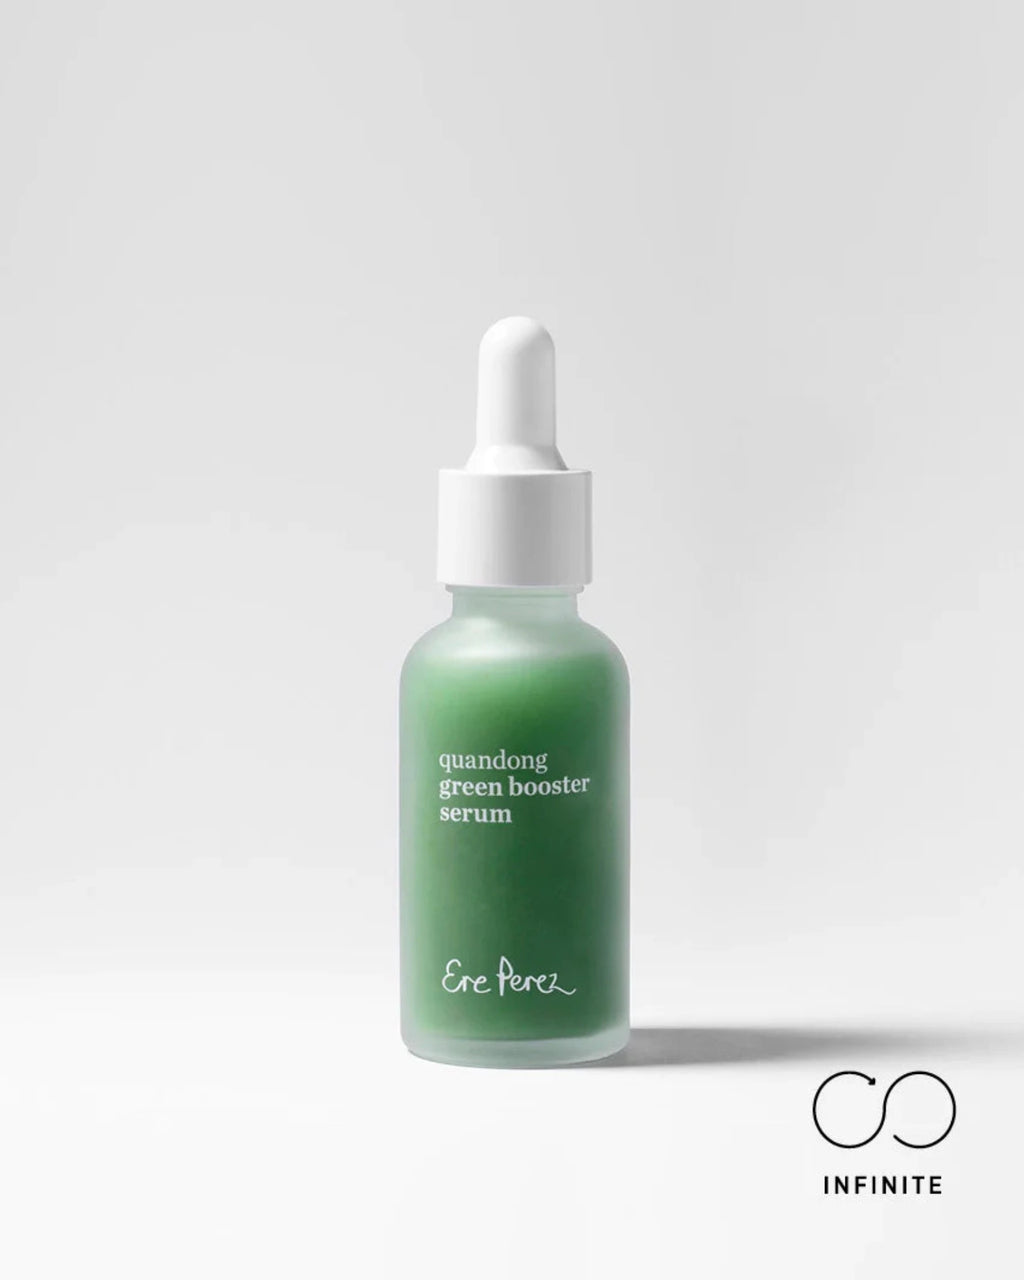 Give your skin a dose of nutritive greens! Packed full of an antioxidant-rich blend of superfood ingredients to support a healthy, glowing complexion. Promotes supple skin Calms inflammations&nbsp; Balances oily or acne-prone skin All skin types, suits sensitive skin Vegan and cruelty-free